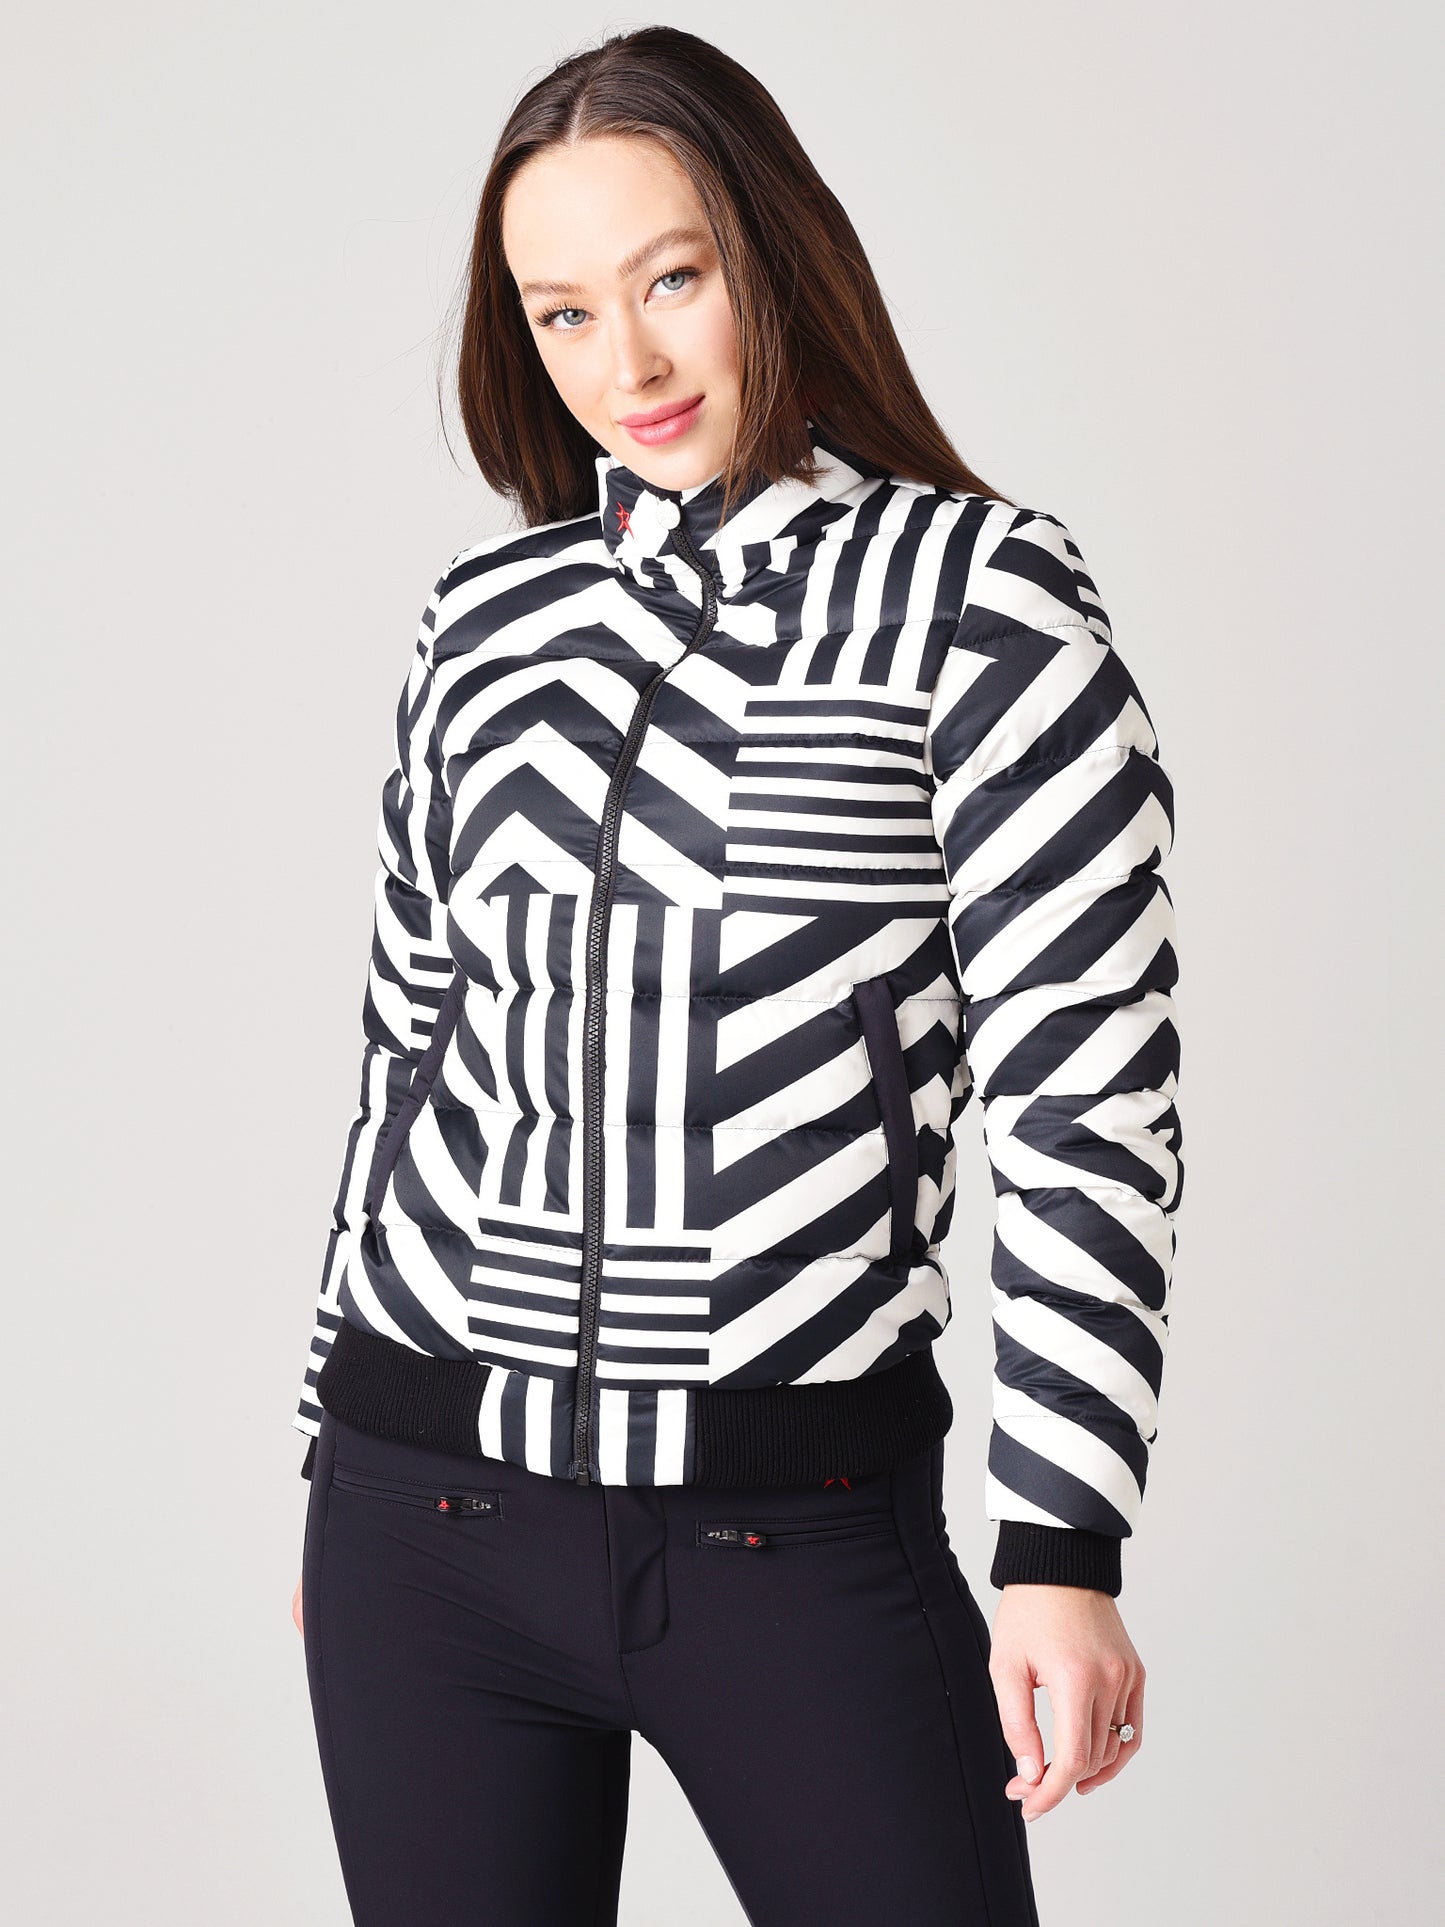 Perfect Moment Women's Star Dazzle Bomber Jacket